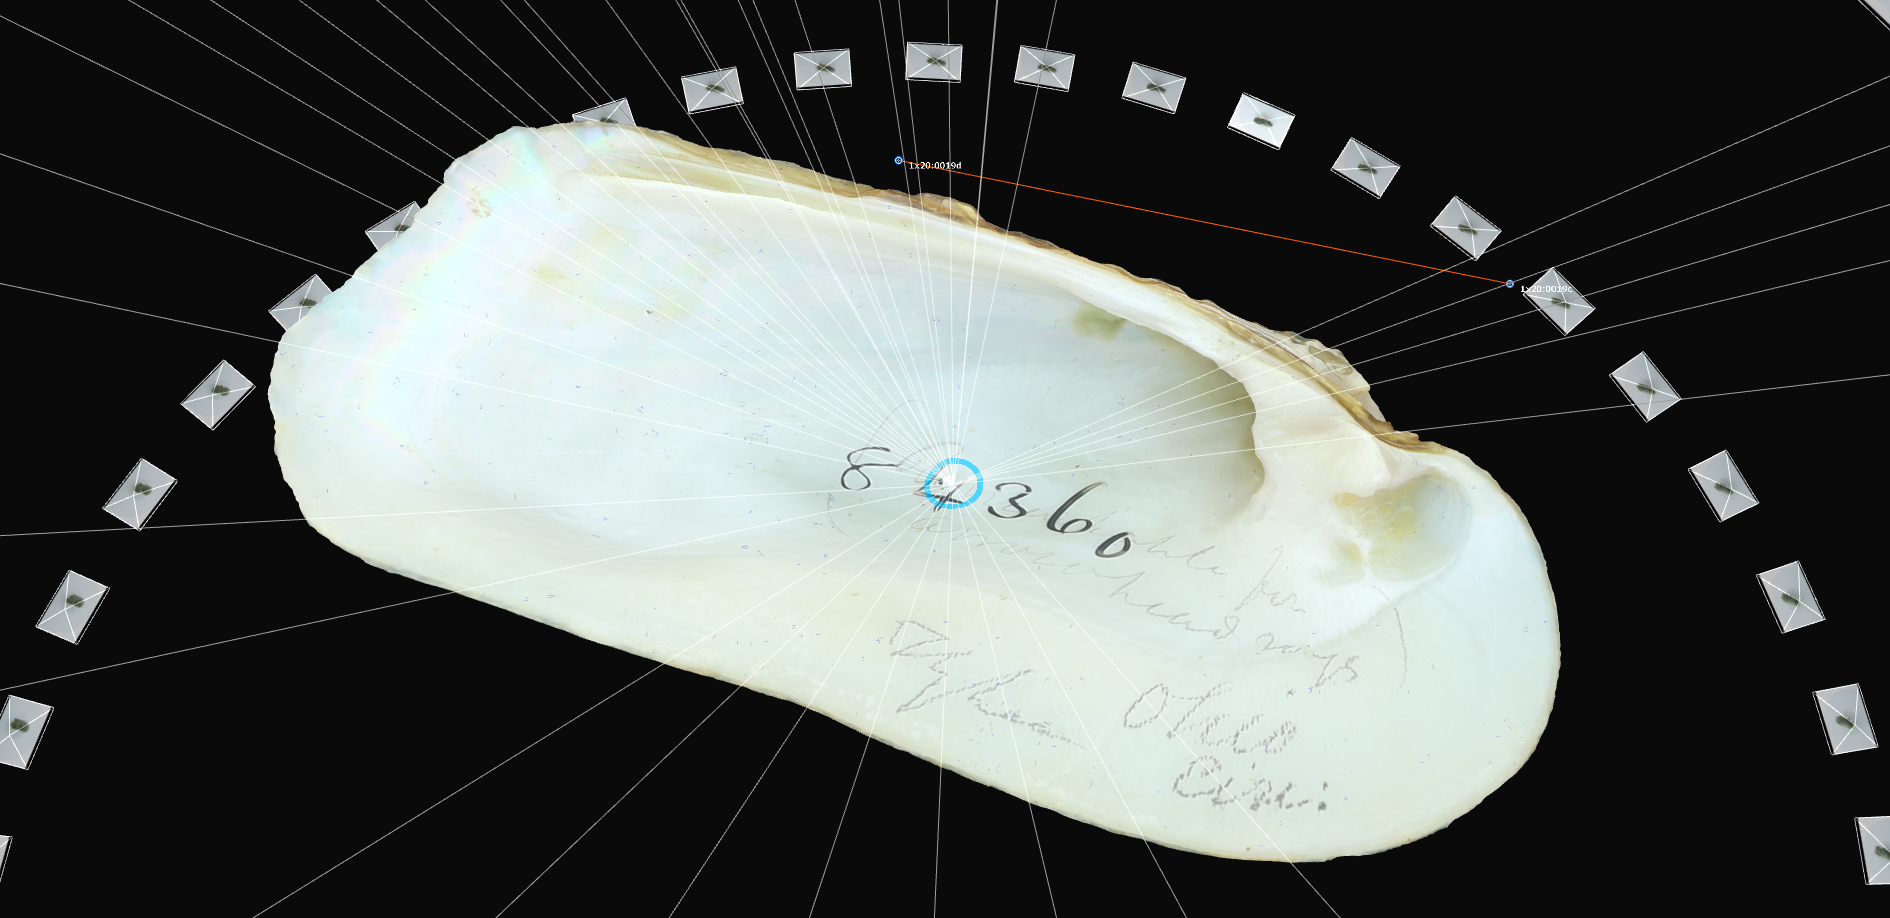 Image depicting the software reconstruction of a 3D freshwater mussel shell